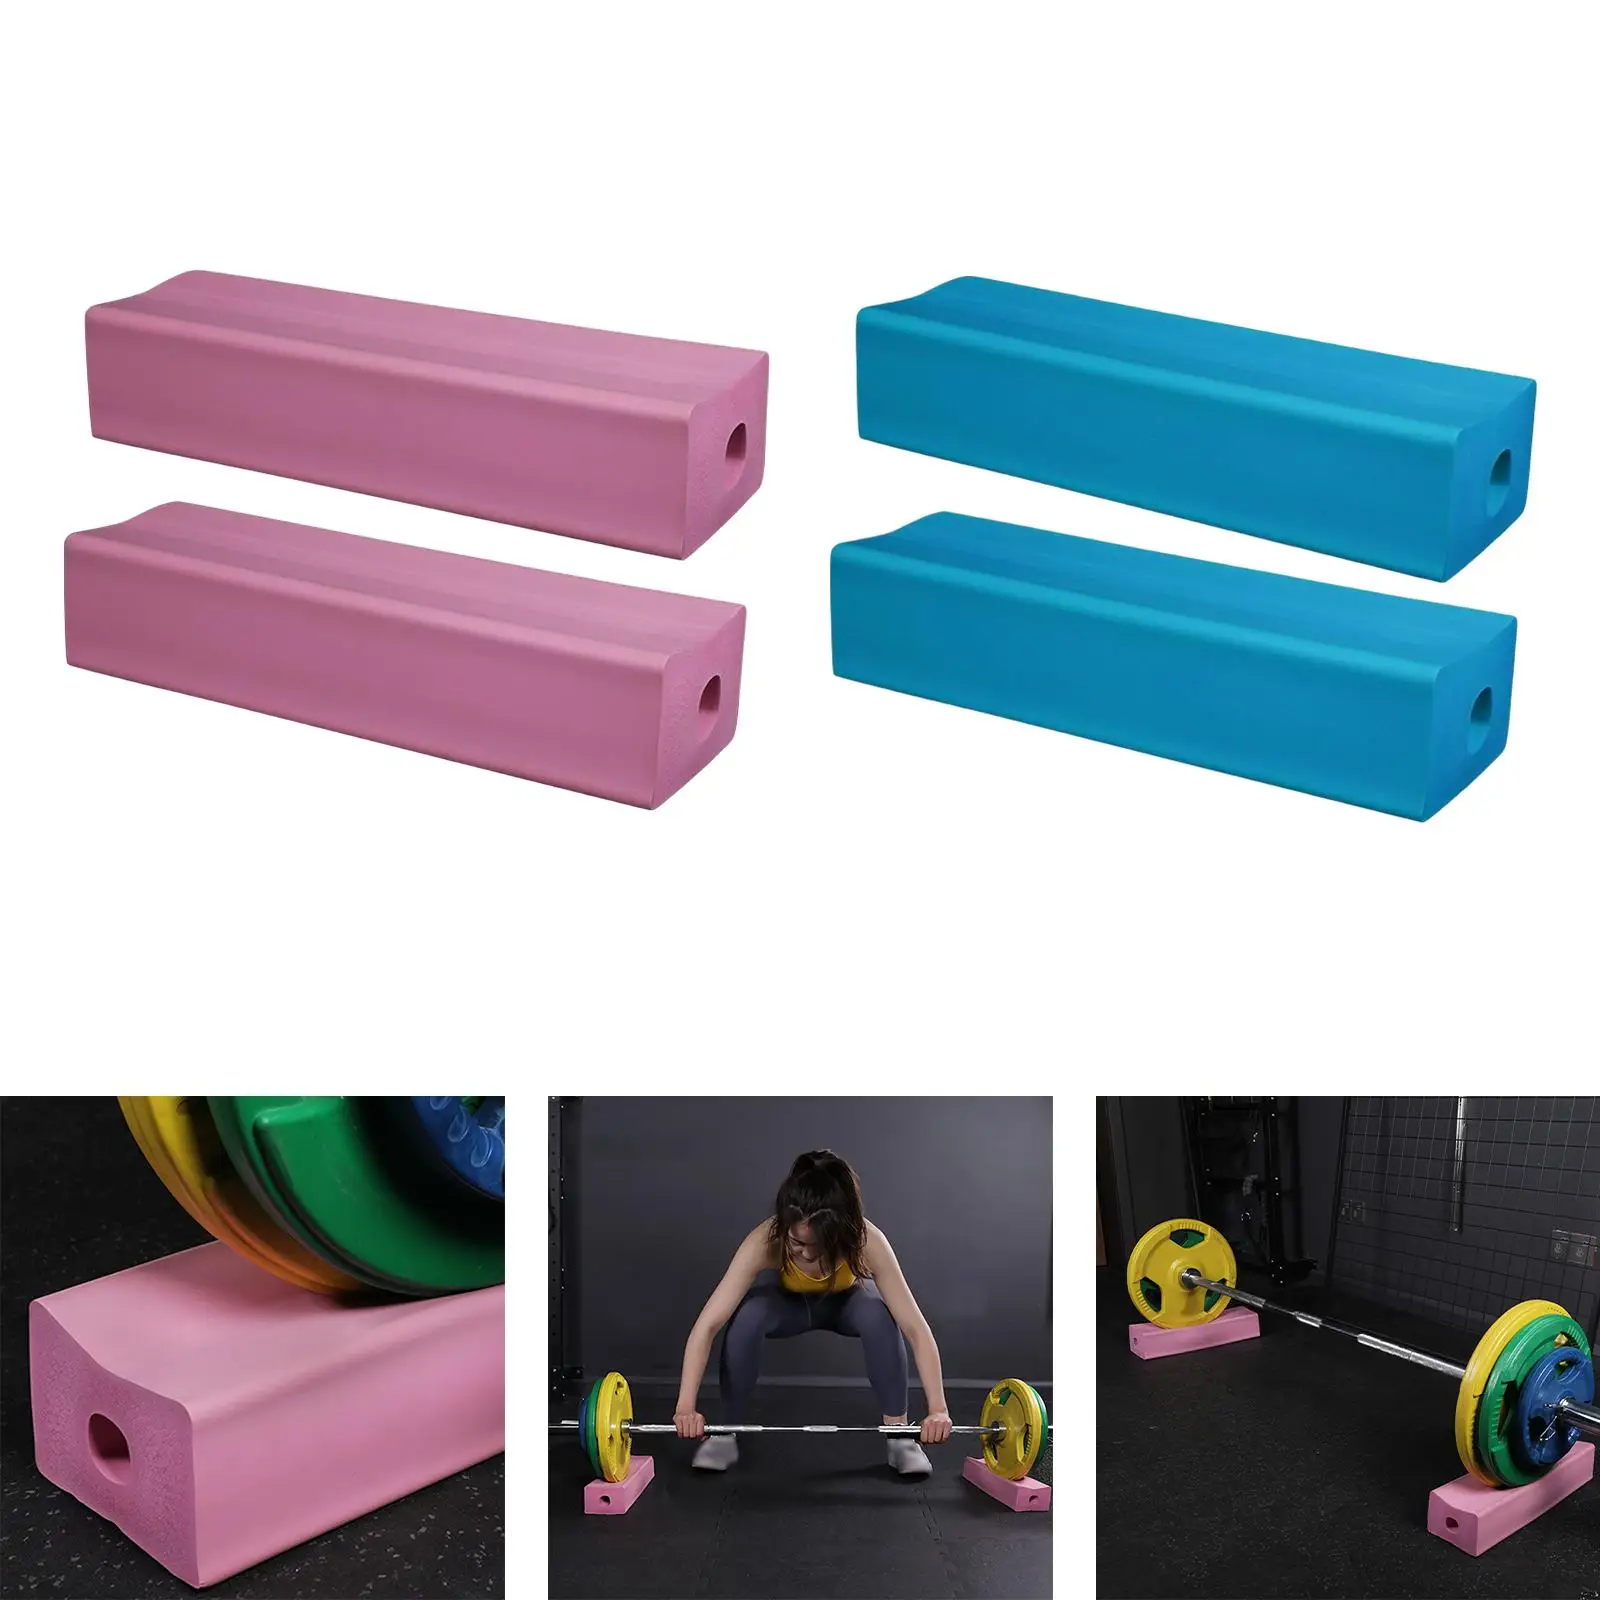 Barbell Crash Pad Groove Design Good Elasticity Thick Weight Lifting Drop Pads for Weight Training Barbell Plates Home Office